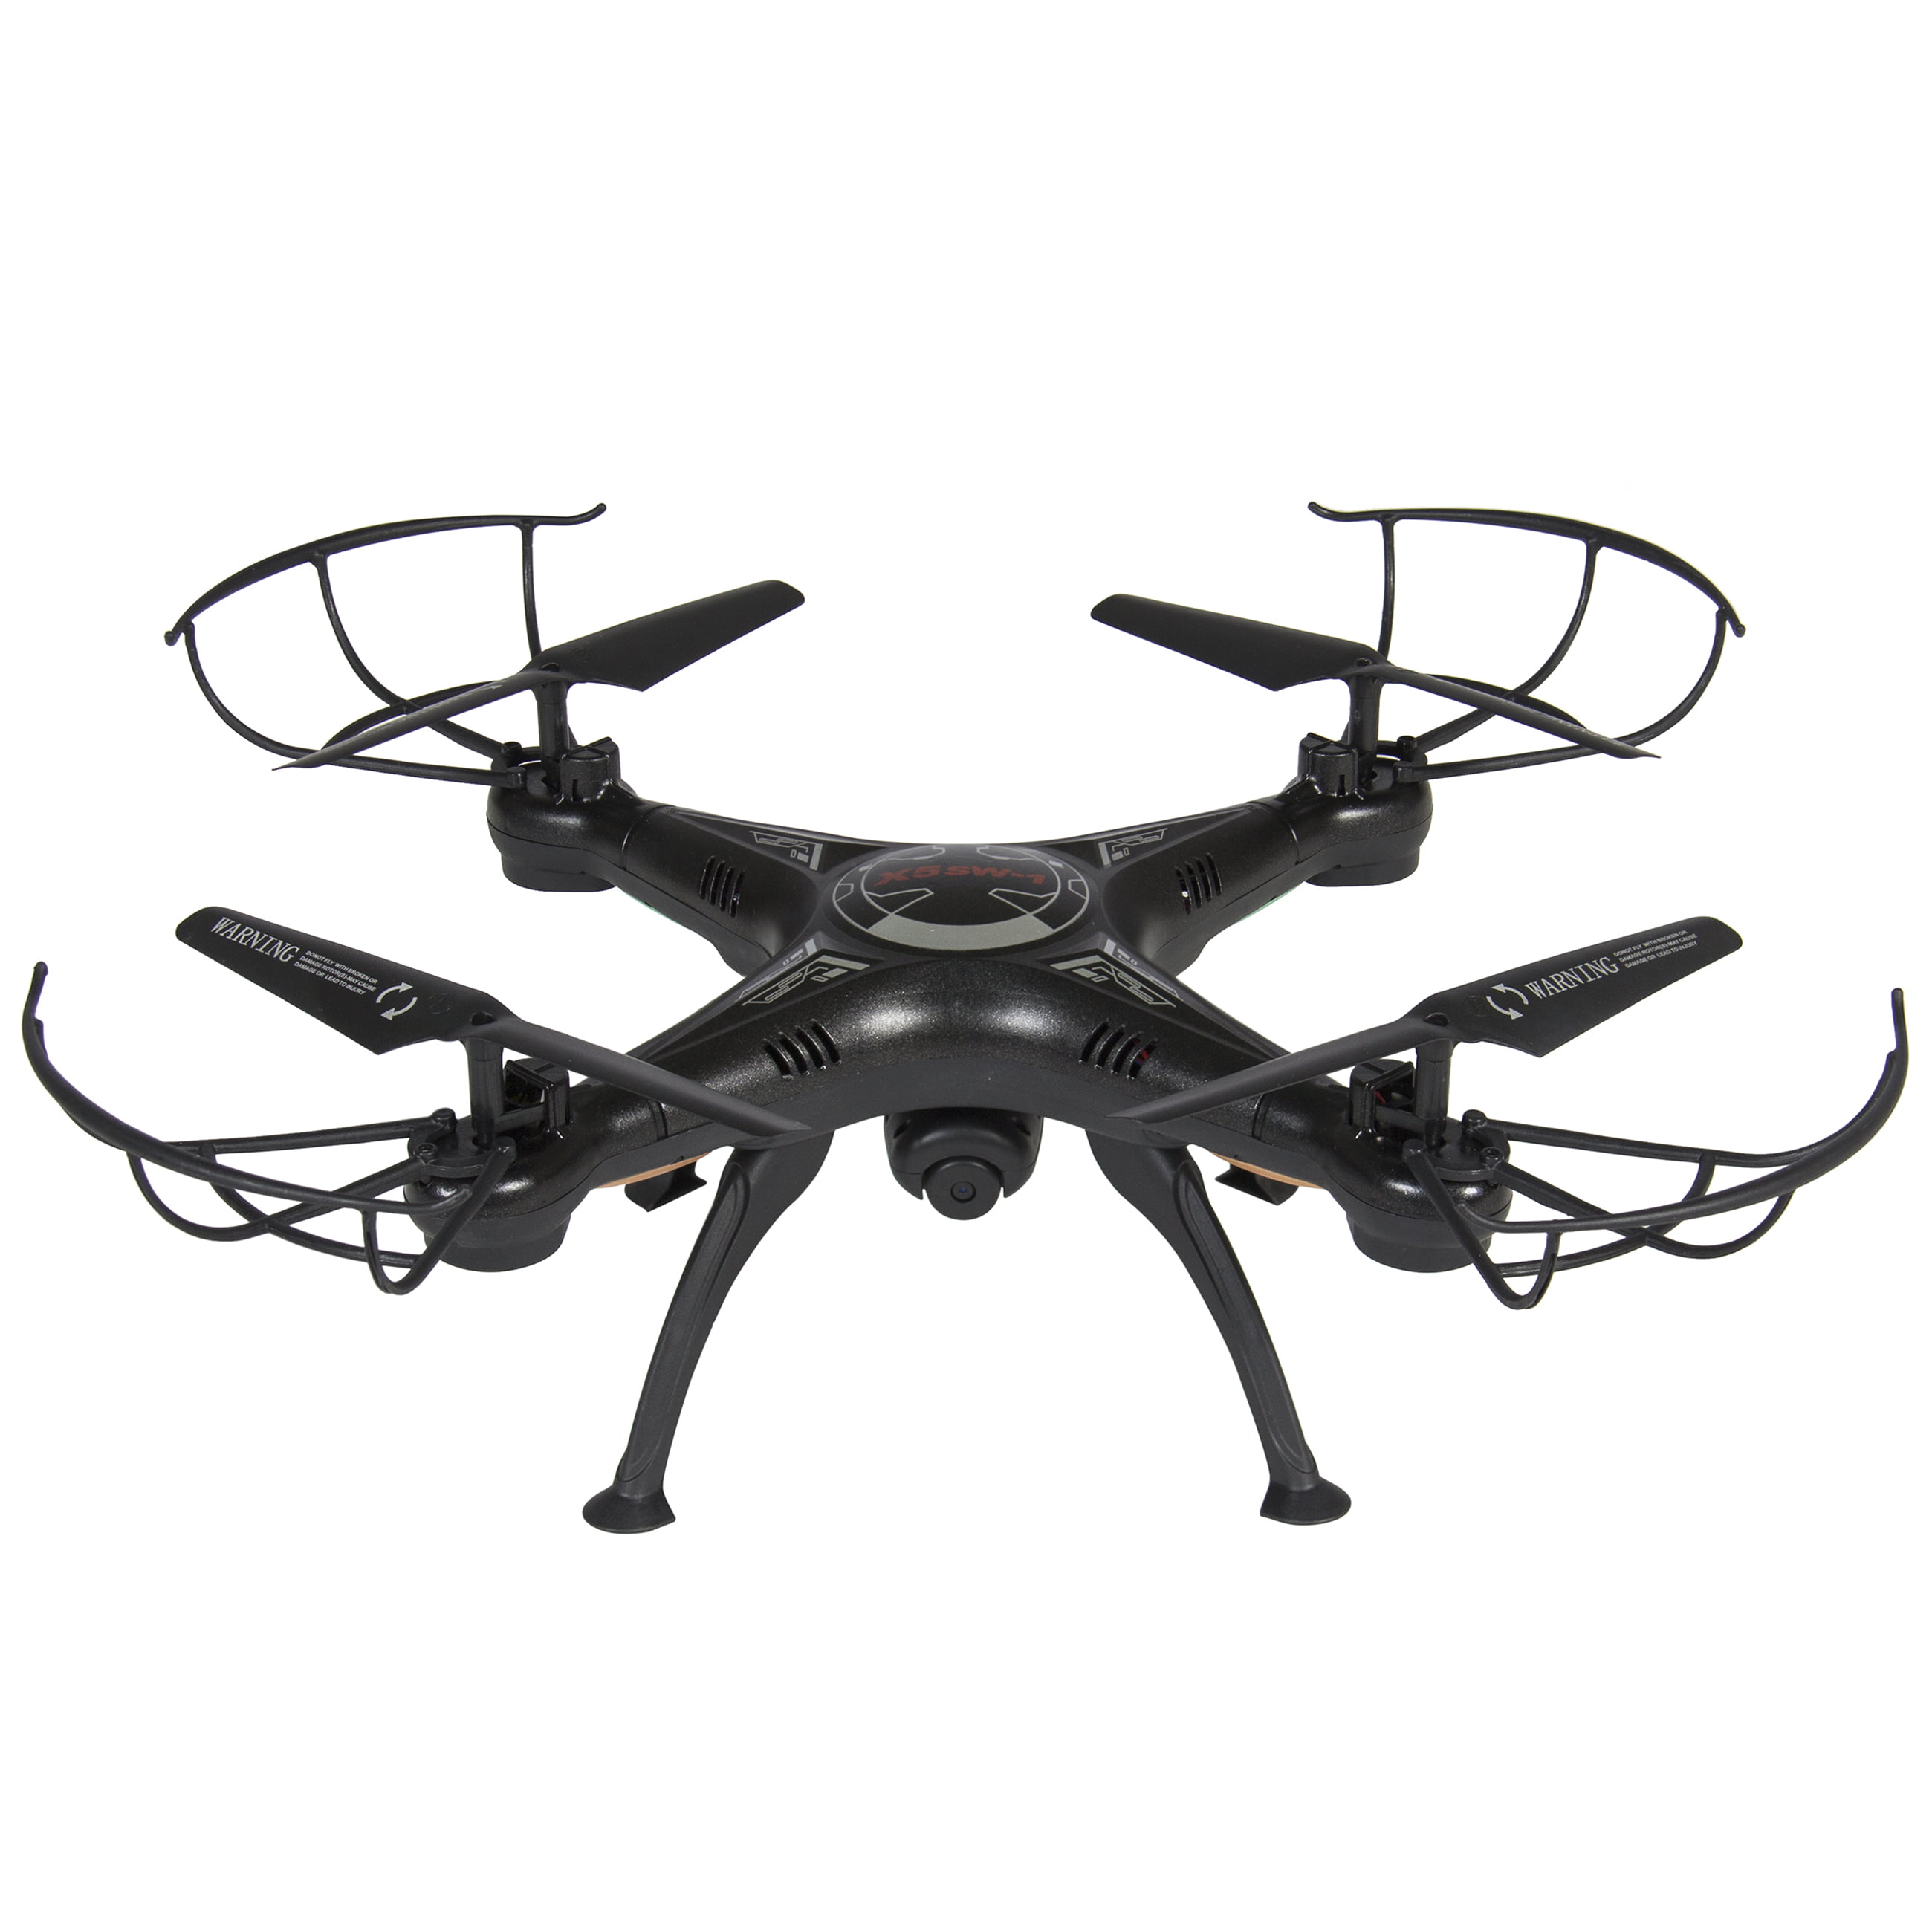 Upgraded 6-Axis Headless RC Quadcopter 